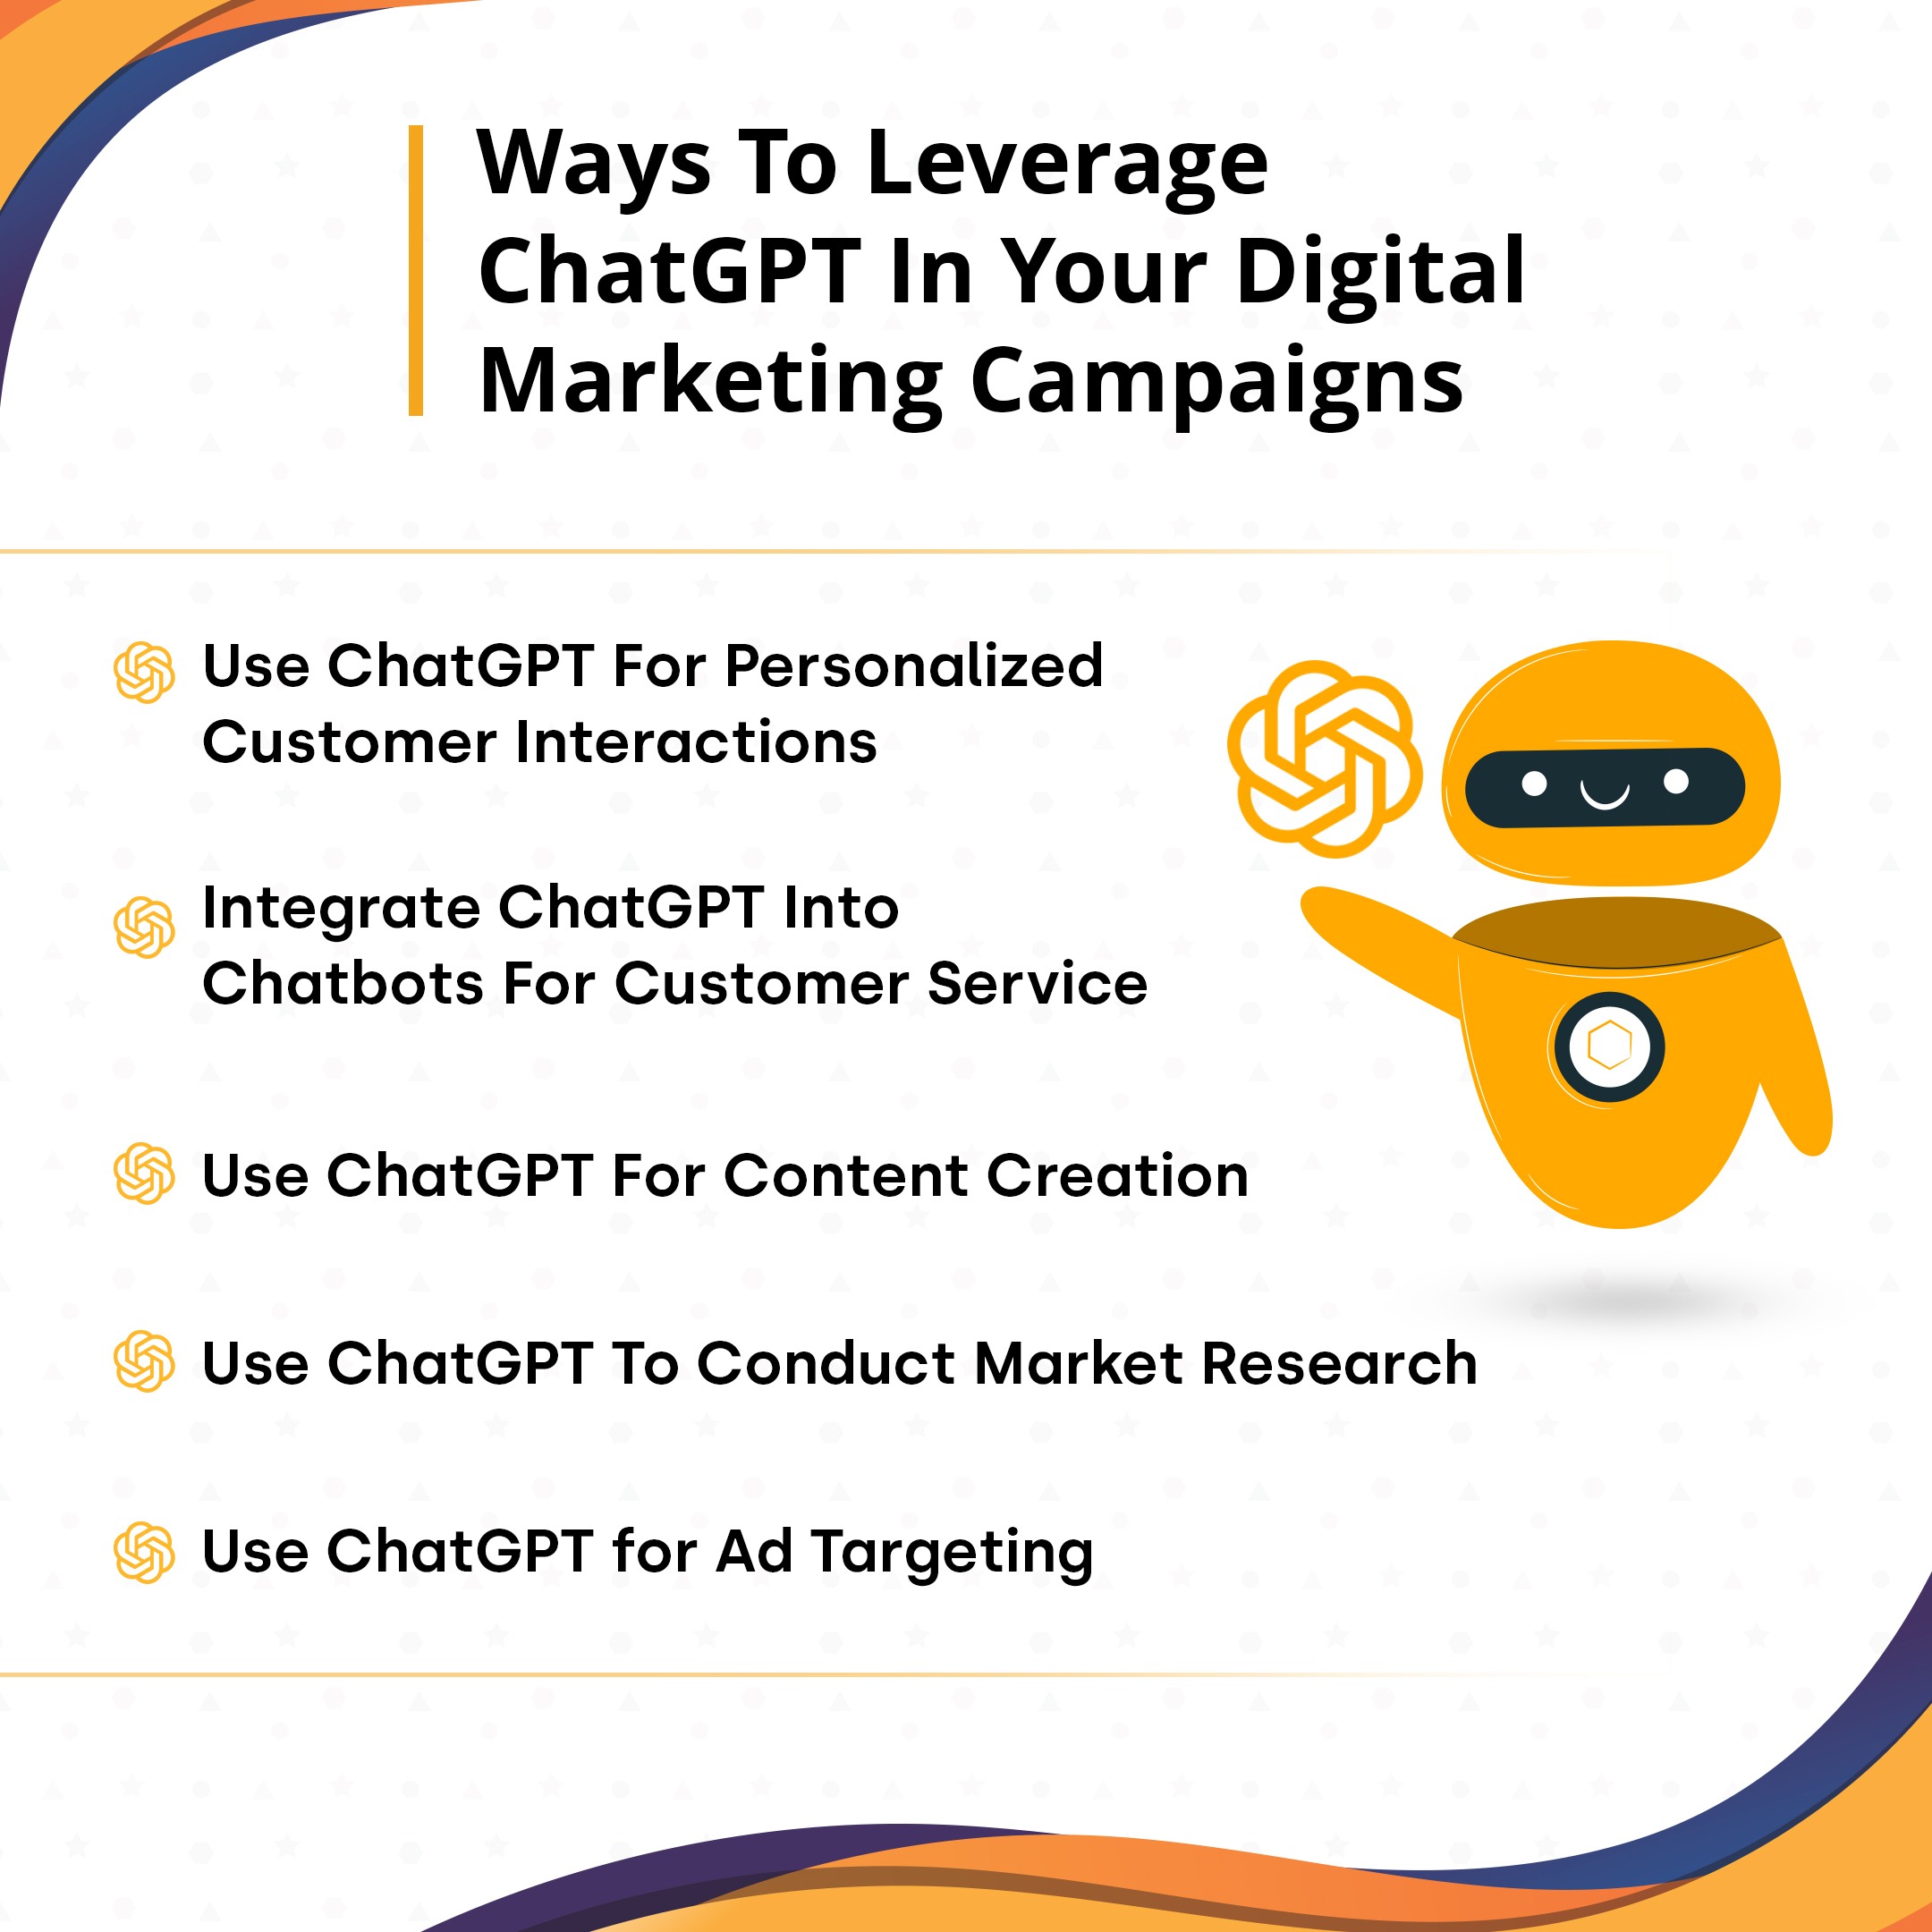 Ways To Leverage ChatGPT In Your Digital Marketing Campaigns